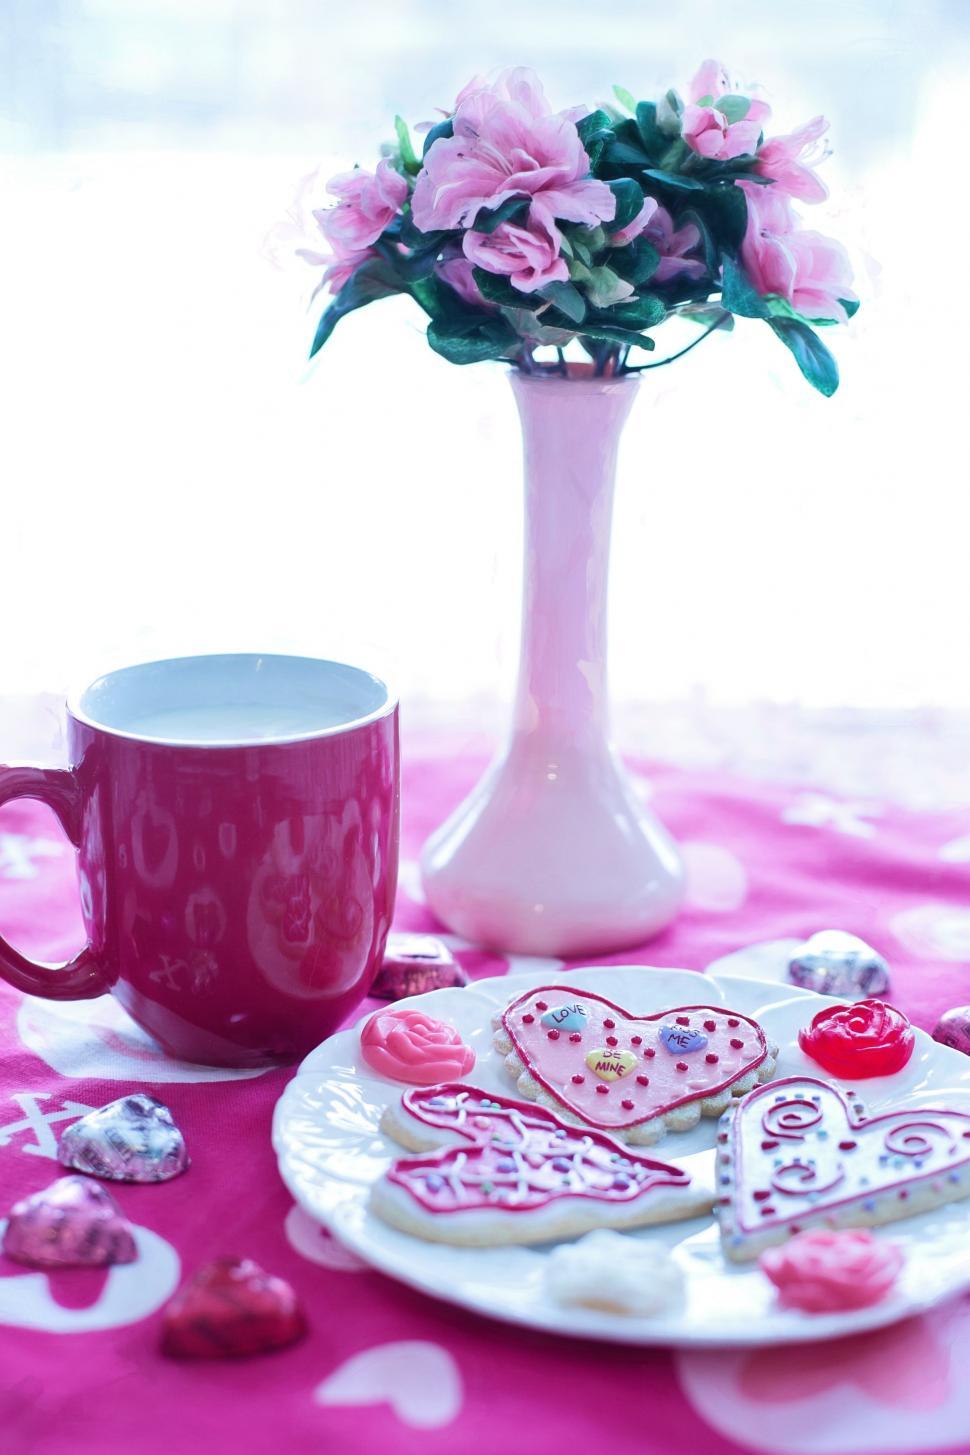 Free Image of Valentine chocolates and cookies on plate 